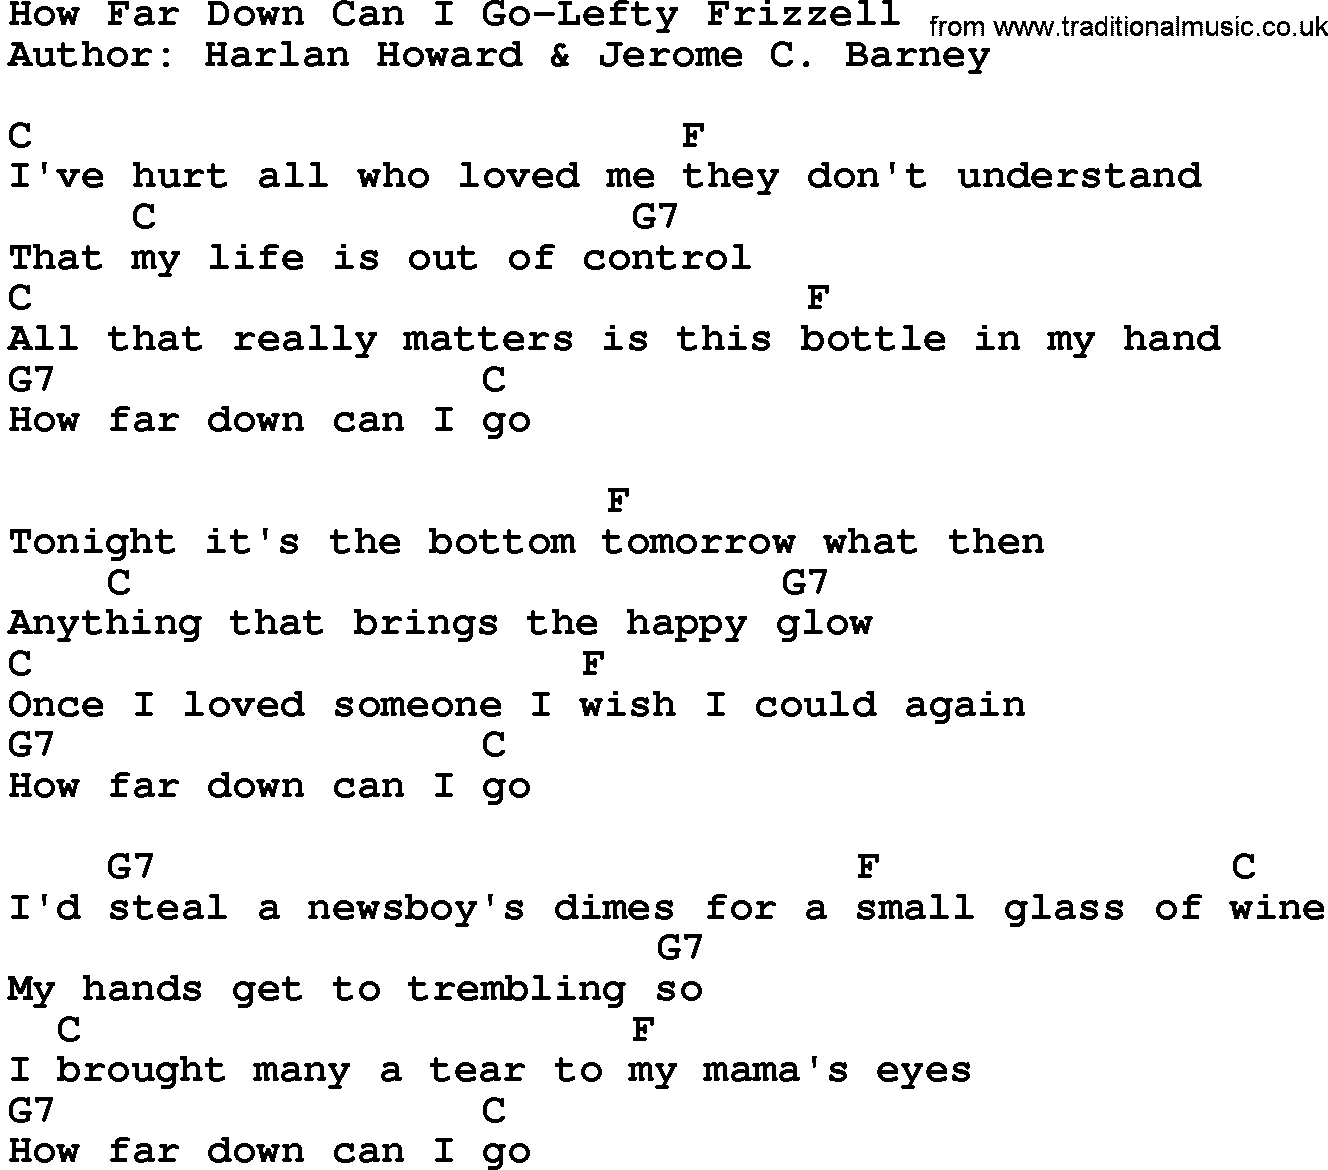 Country music song: How Far Down Can I Go-Lefty Frizzell lyrics and chords